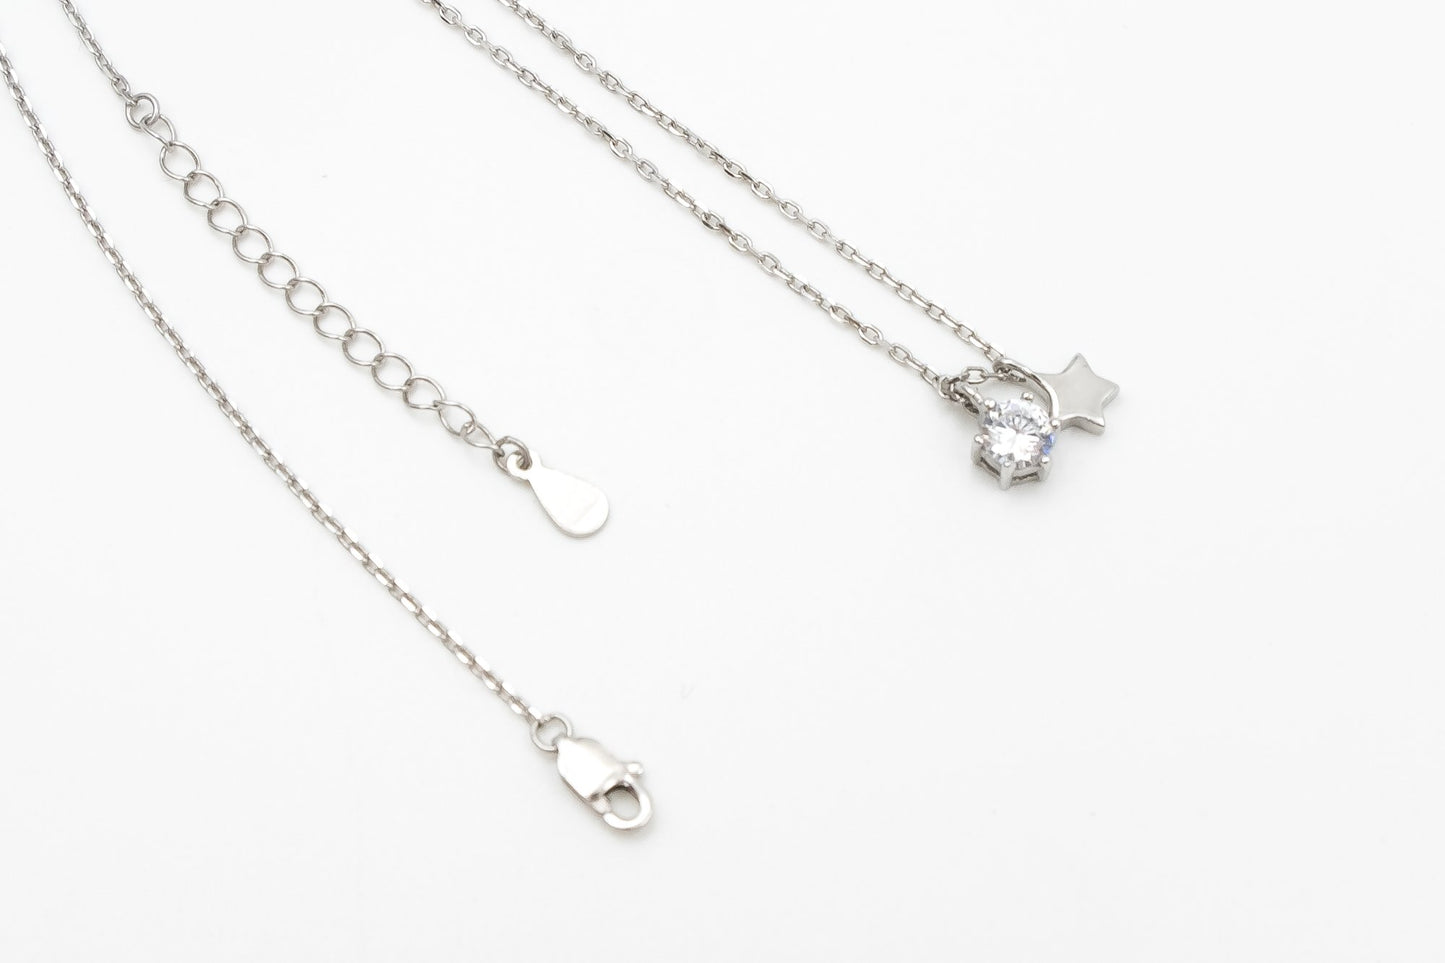 Twinkle Star Necklace